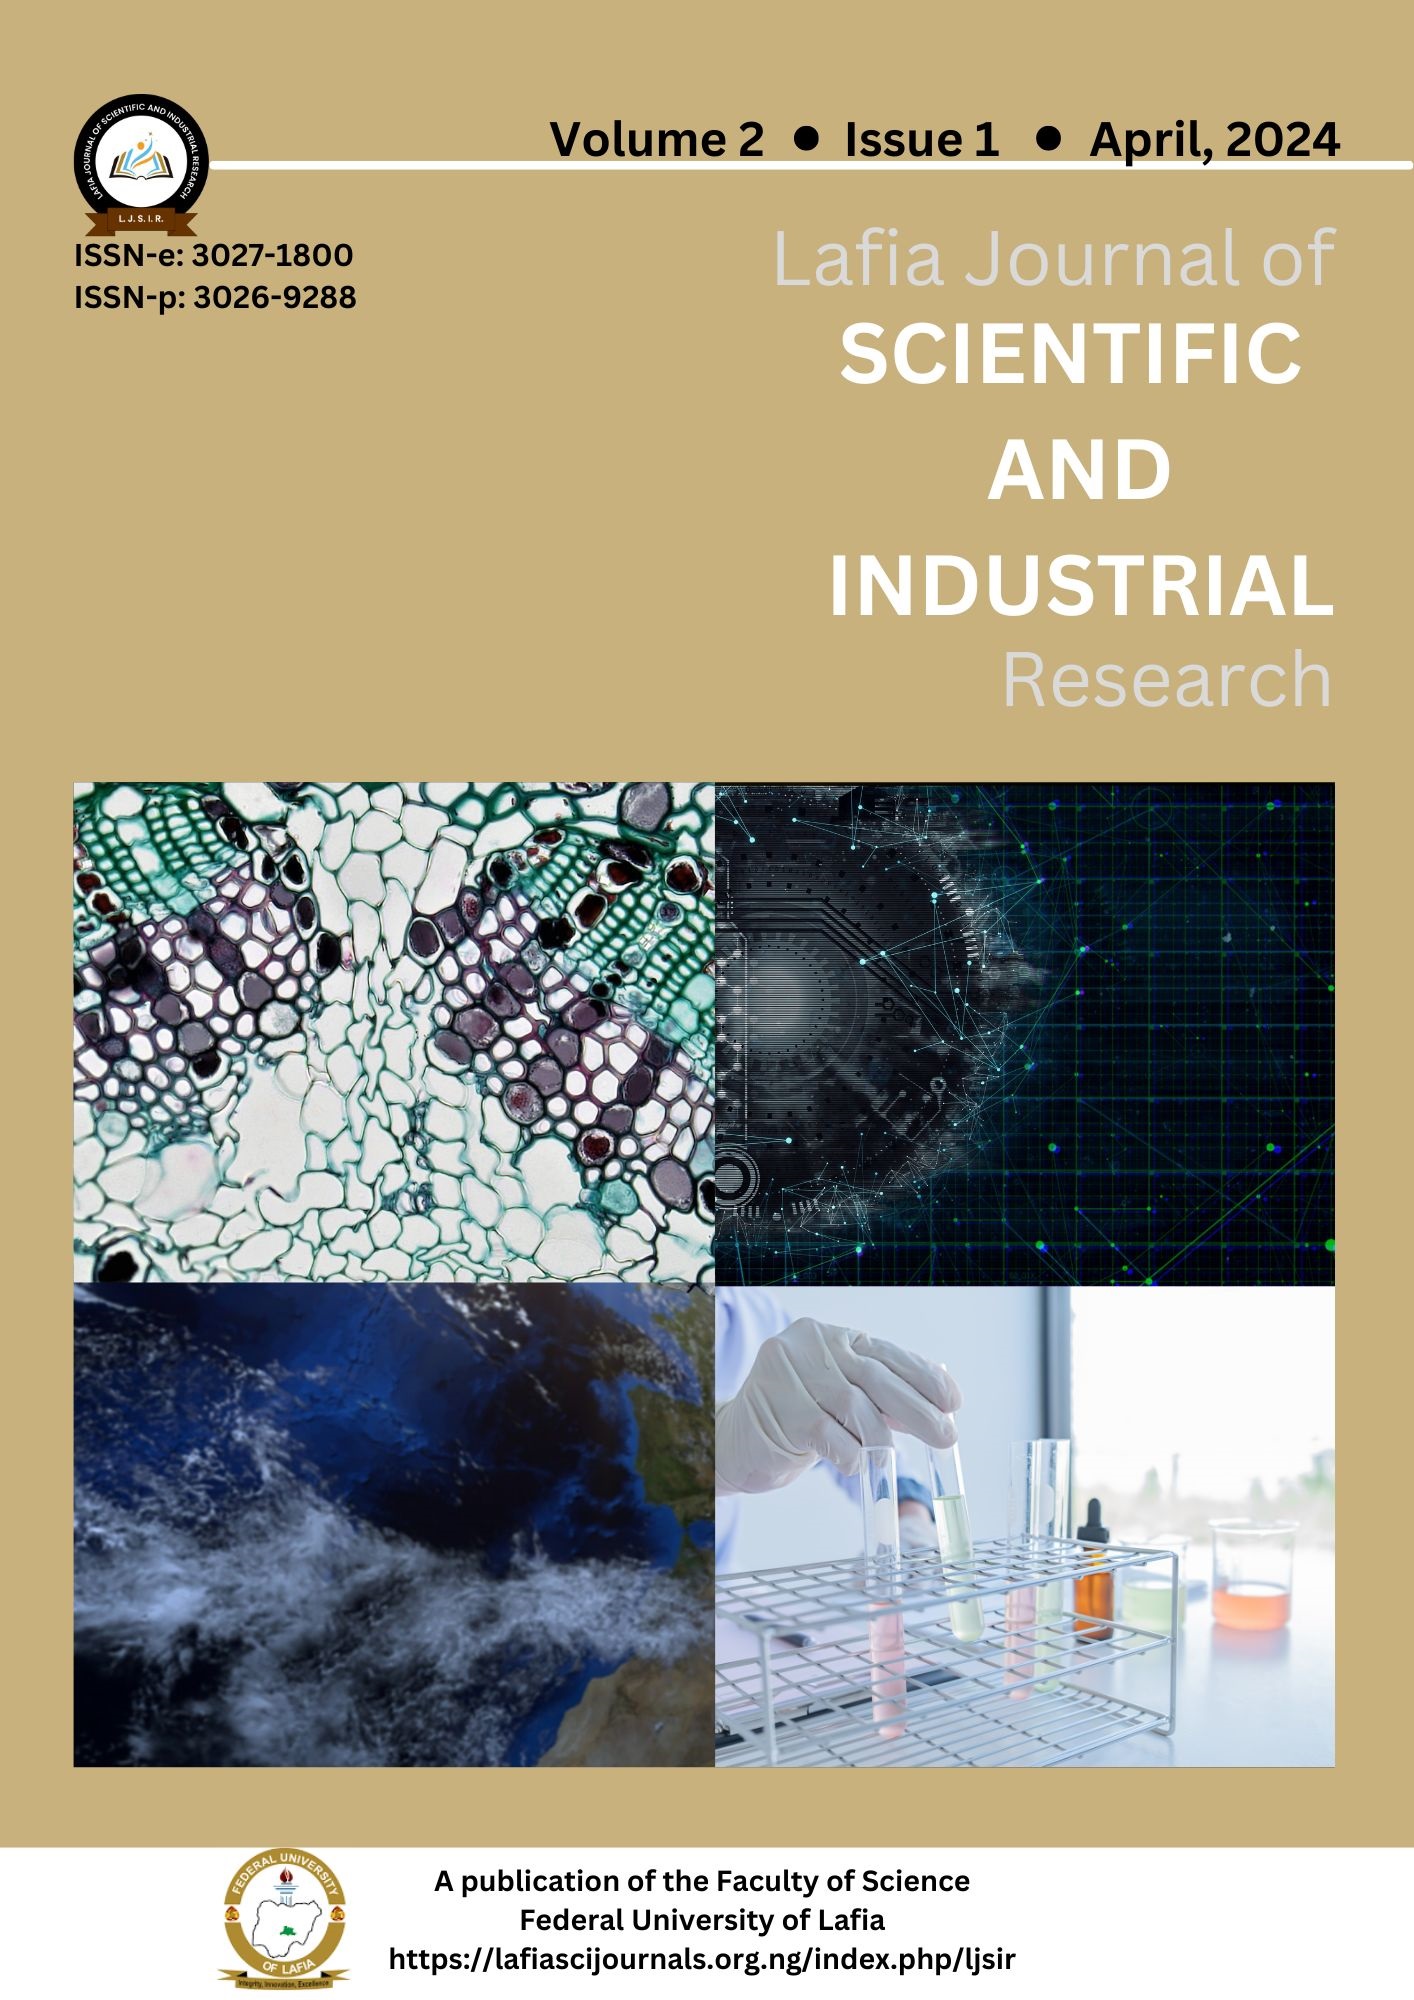 					View Volume 2, Issue 1 (April, 2024), Lafia Journal of Scientific and Industrial Research (LJSIR)
				